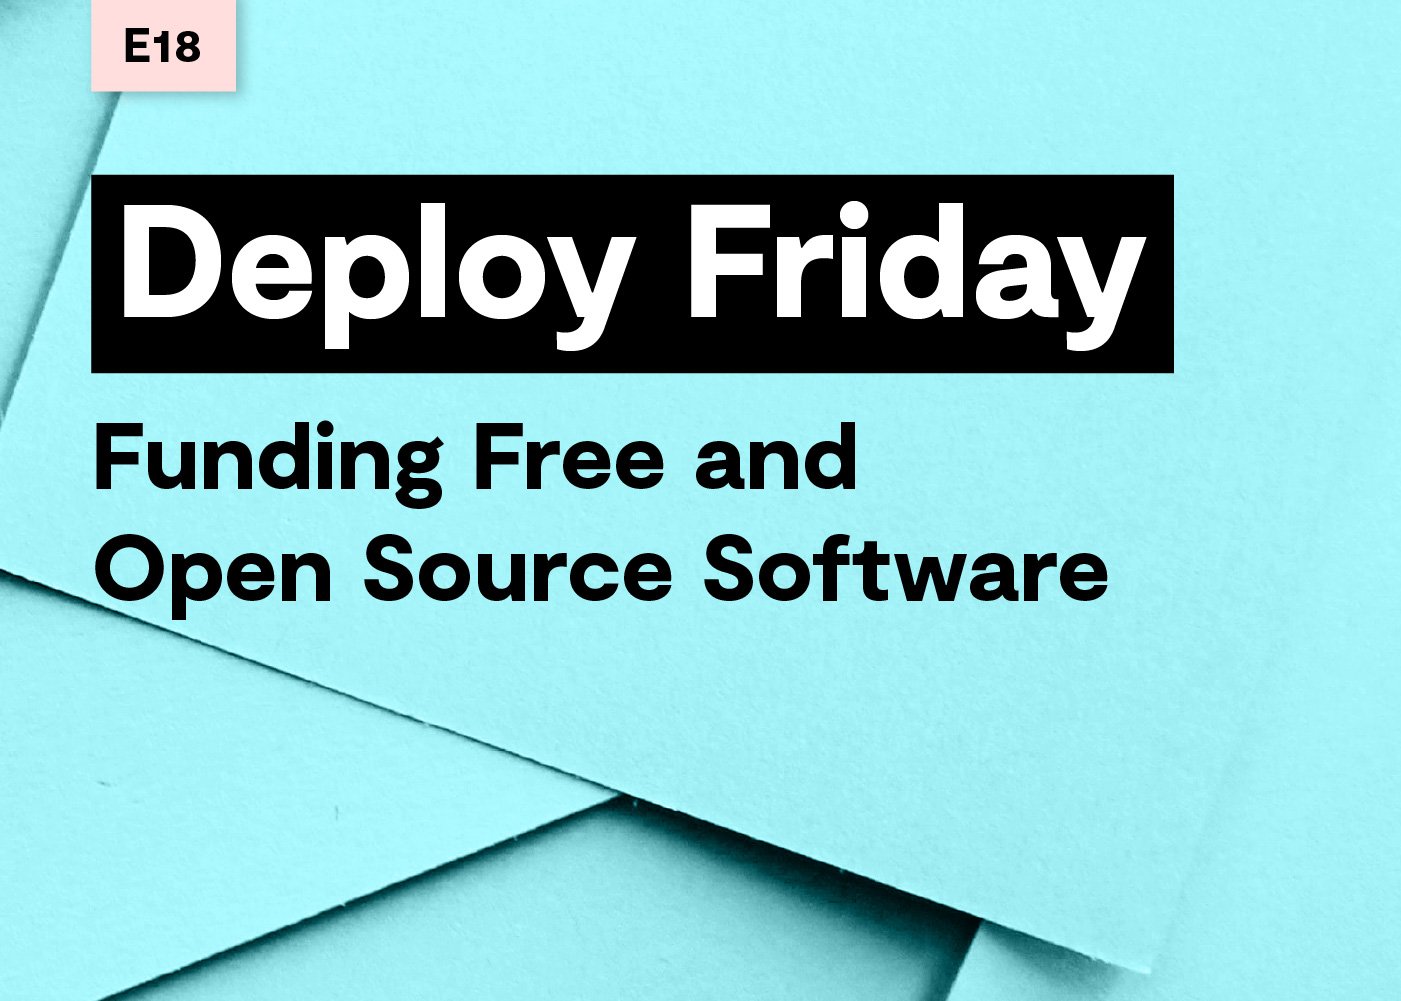 Funding Free and Open Source Software